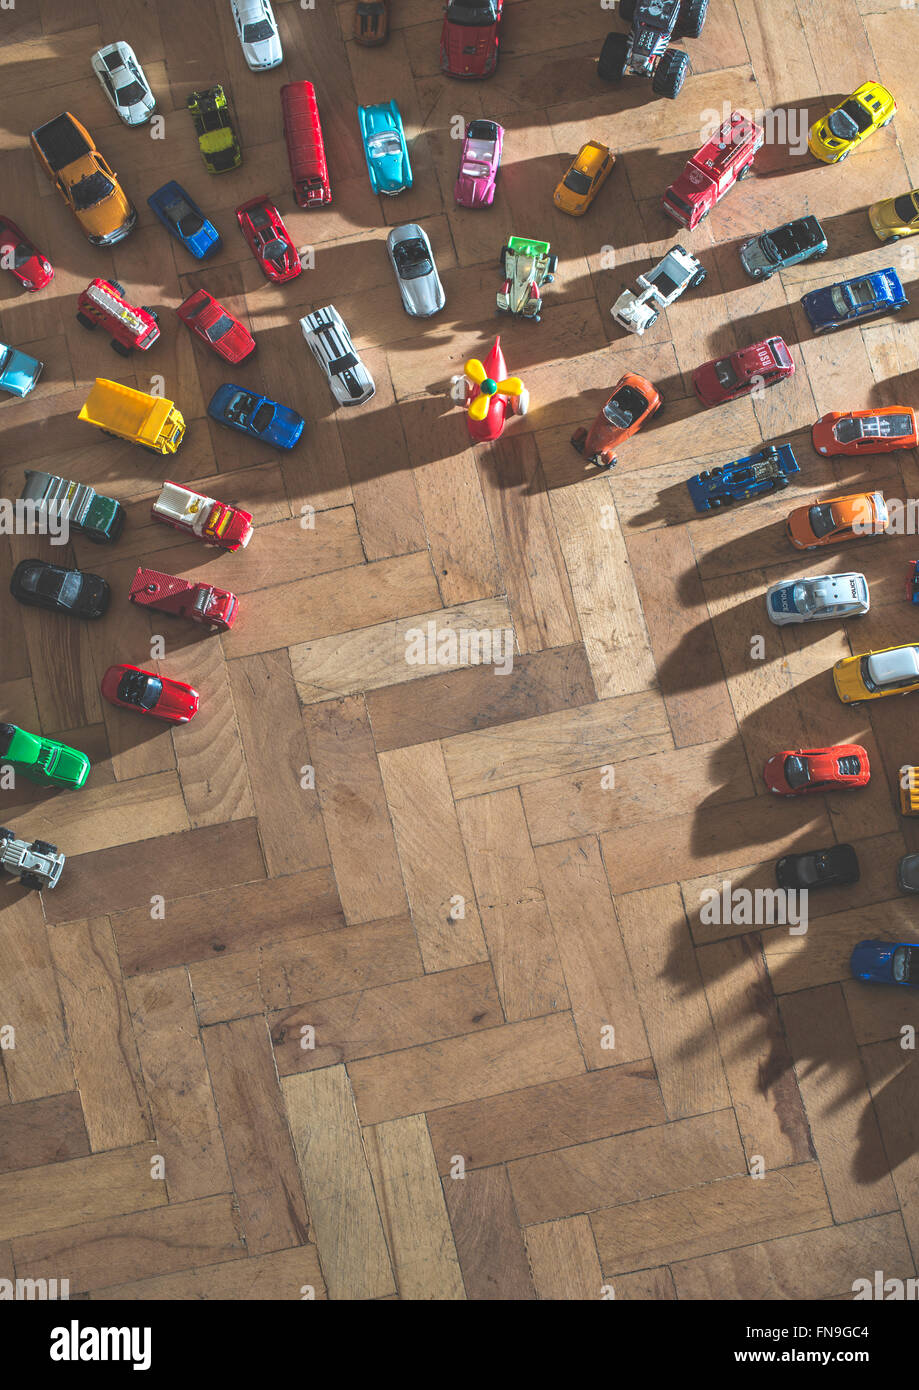 Overhead view of toy cars on the floor Stock Photo